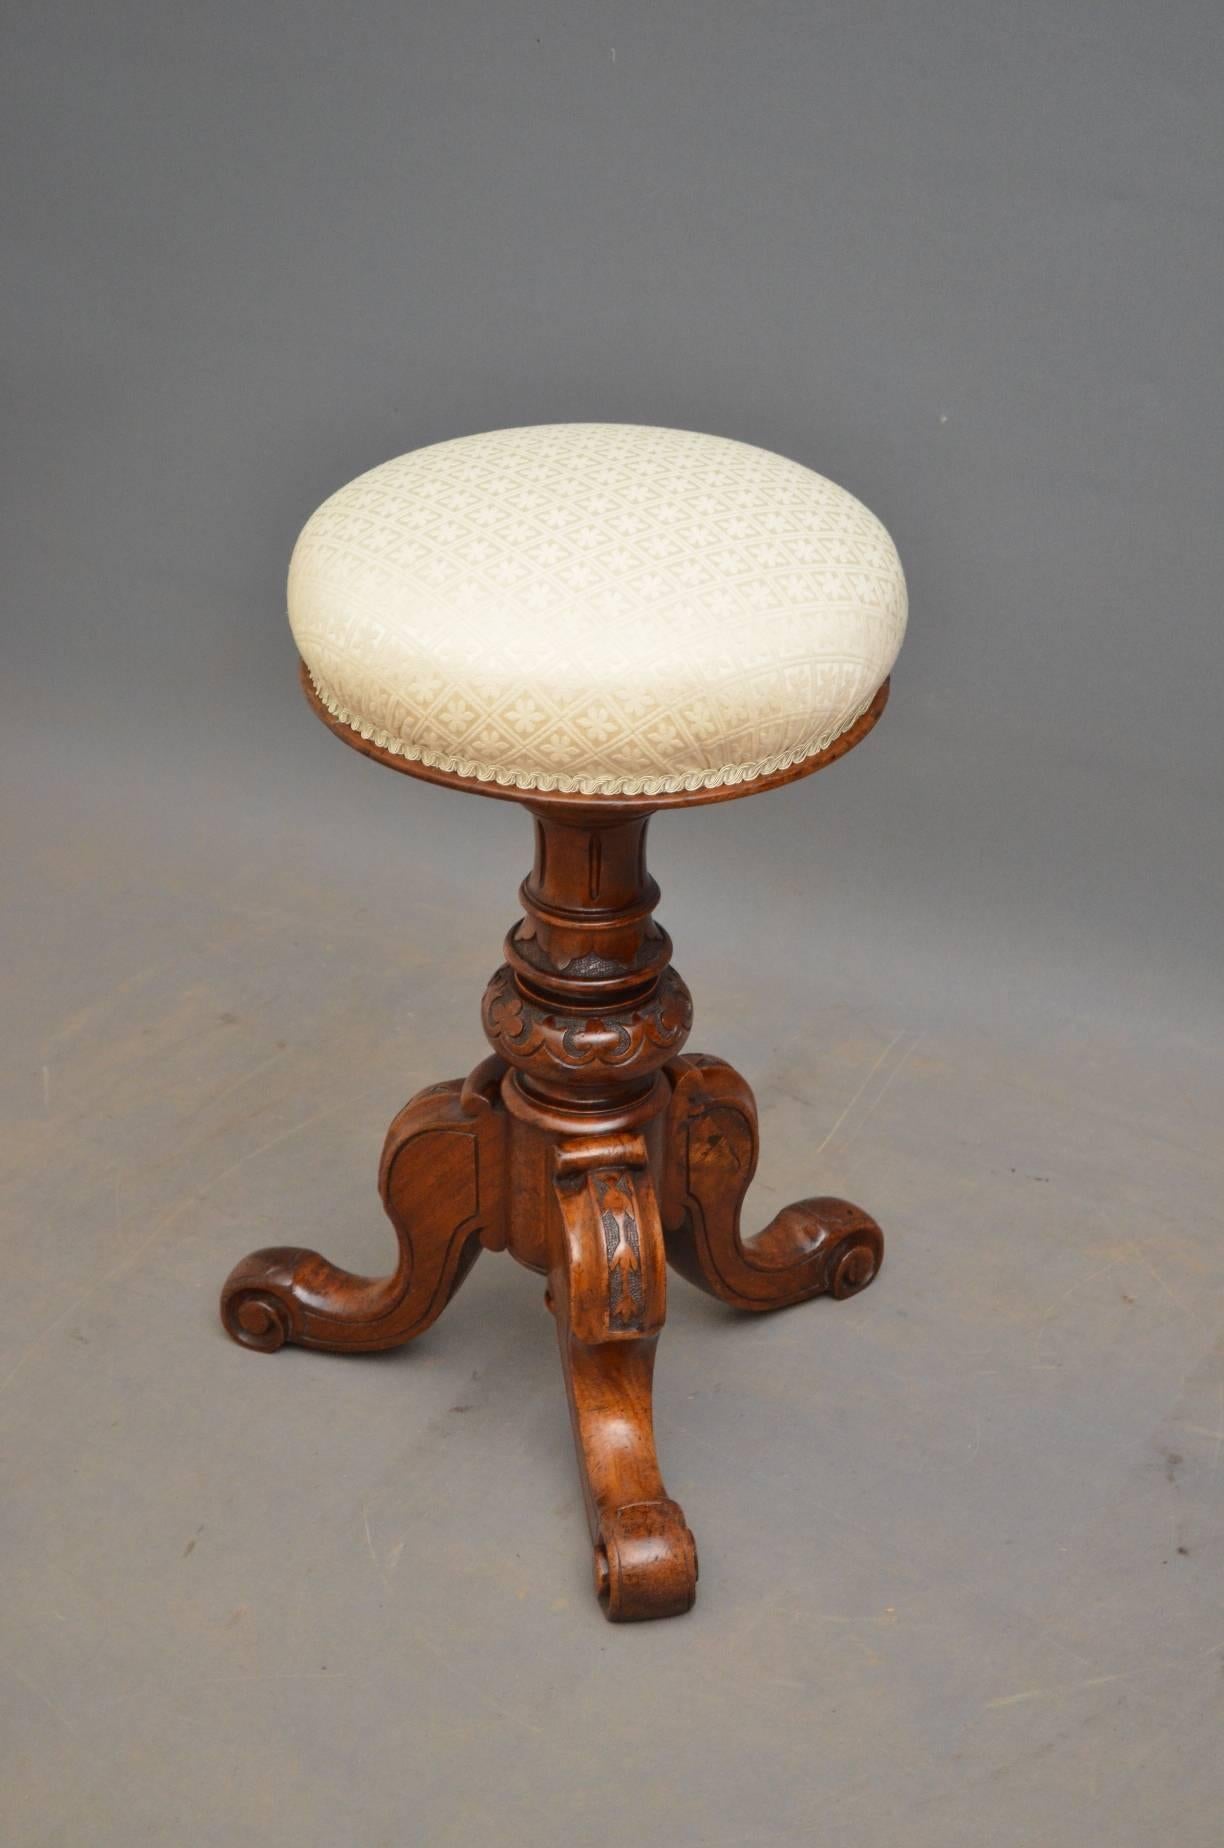 Sn4124 Victorian walnut stool, having height adjustable seat, finely carved column and 2 shaped legs, all in fantastic condition, circa 1870
Measures: H 20